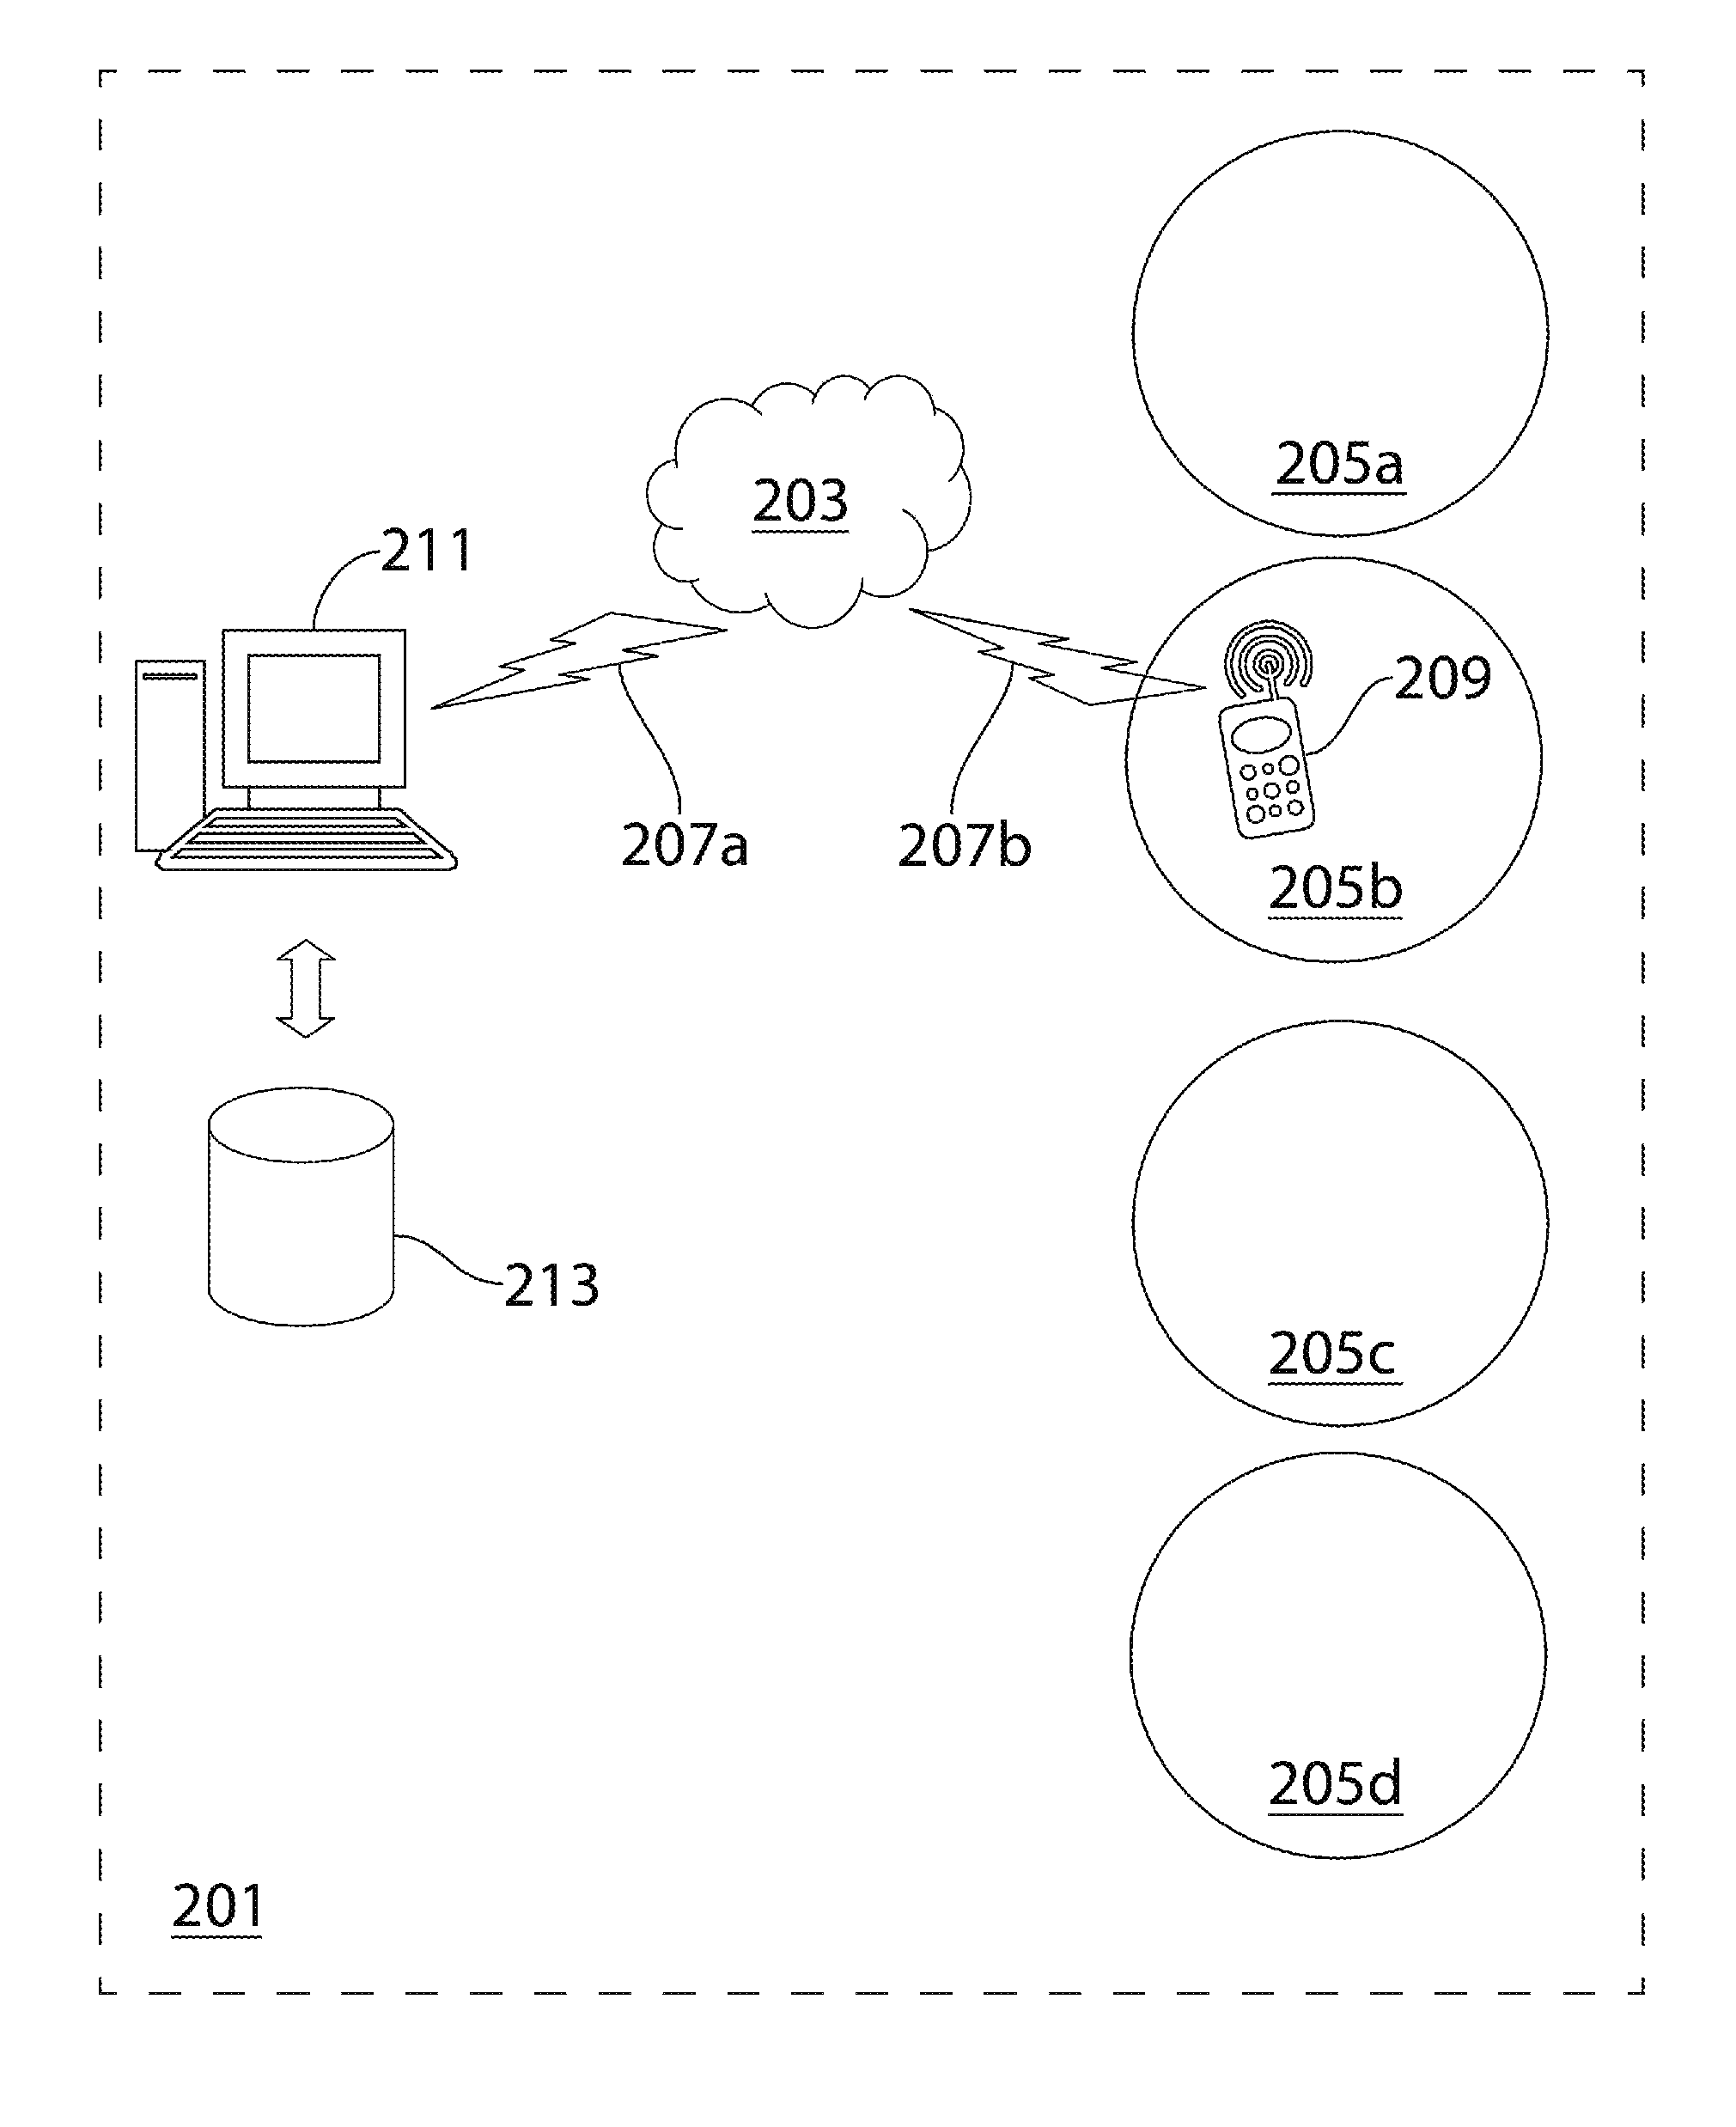 Geo-fence entry and exit notification system